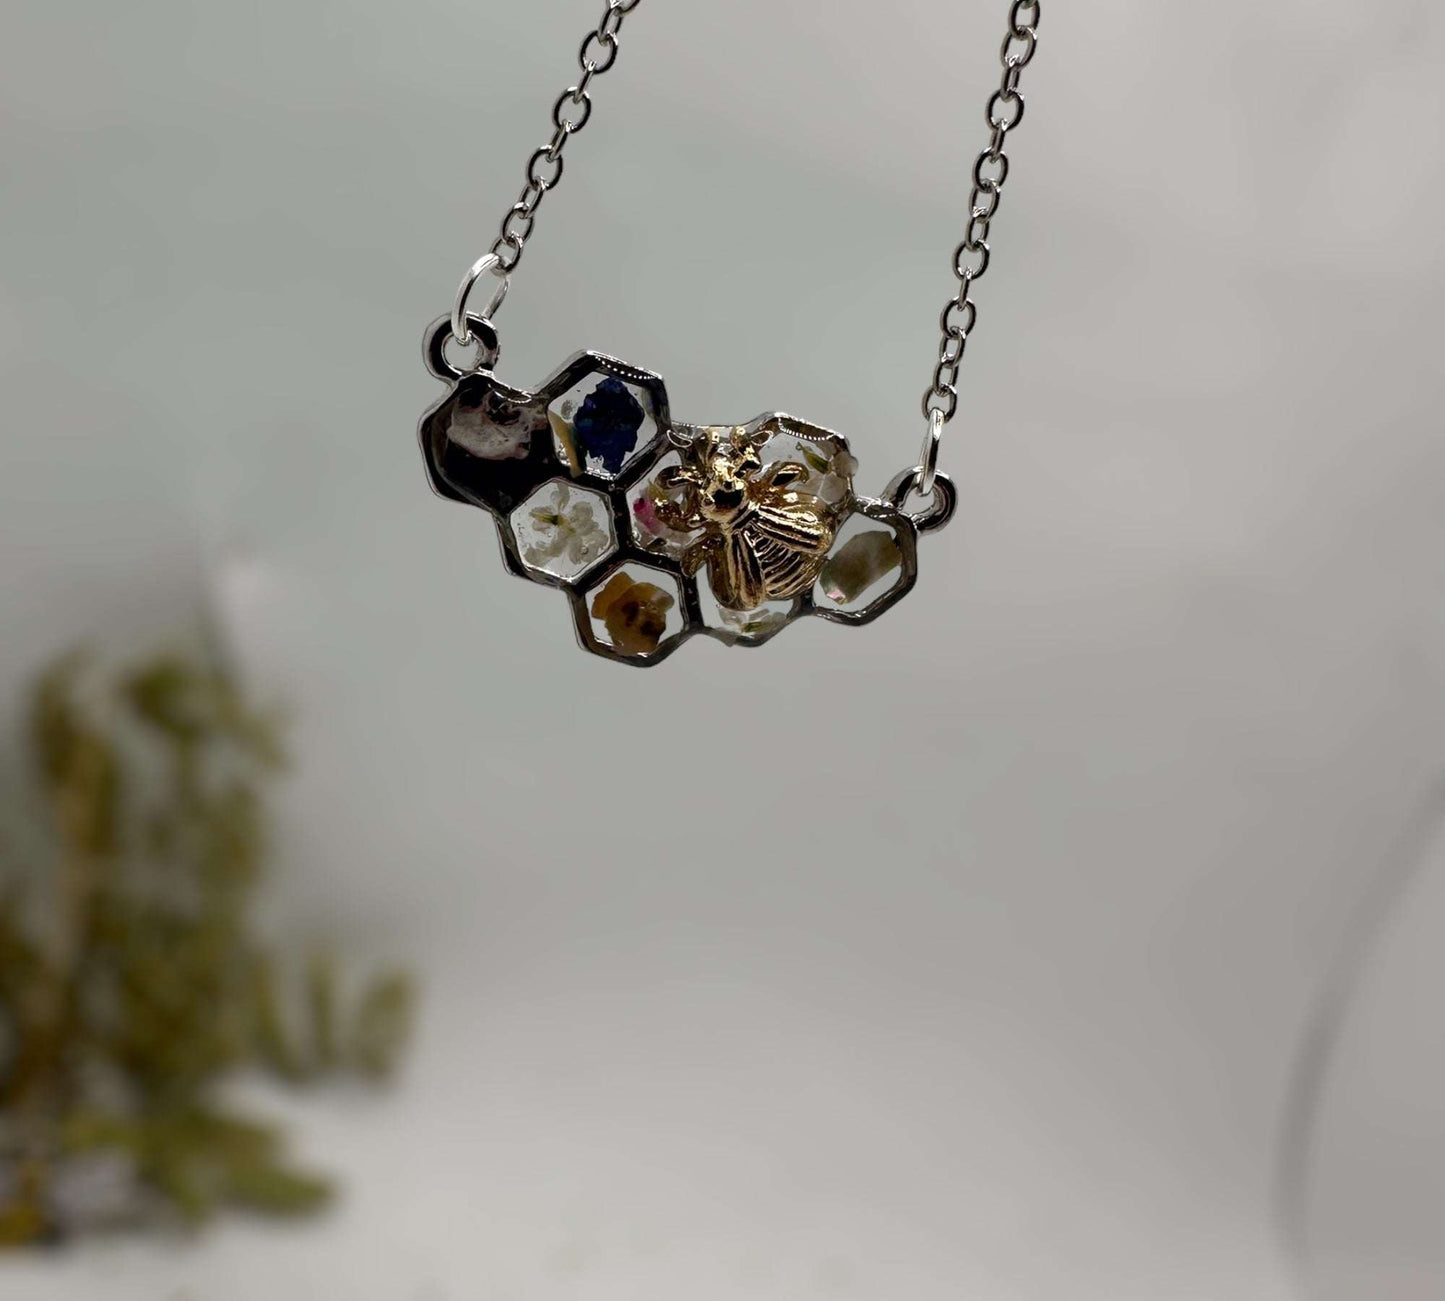 Bee Harmony Pendant - Handmade Pendant with Dried Flowers and Pearls